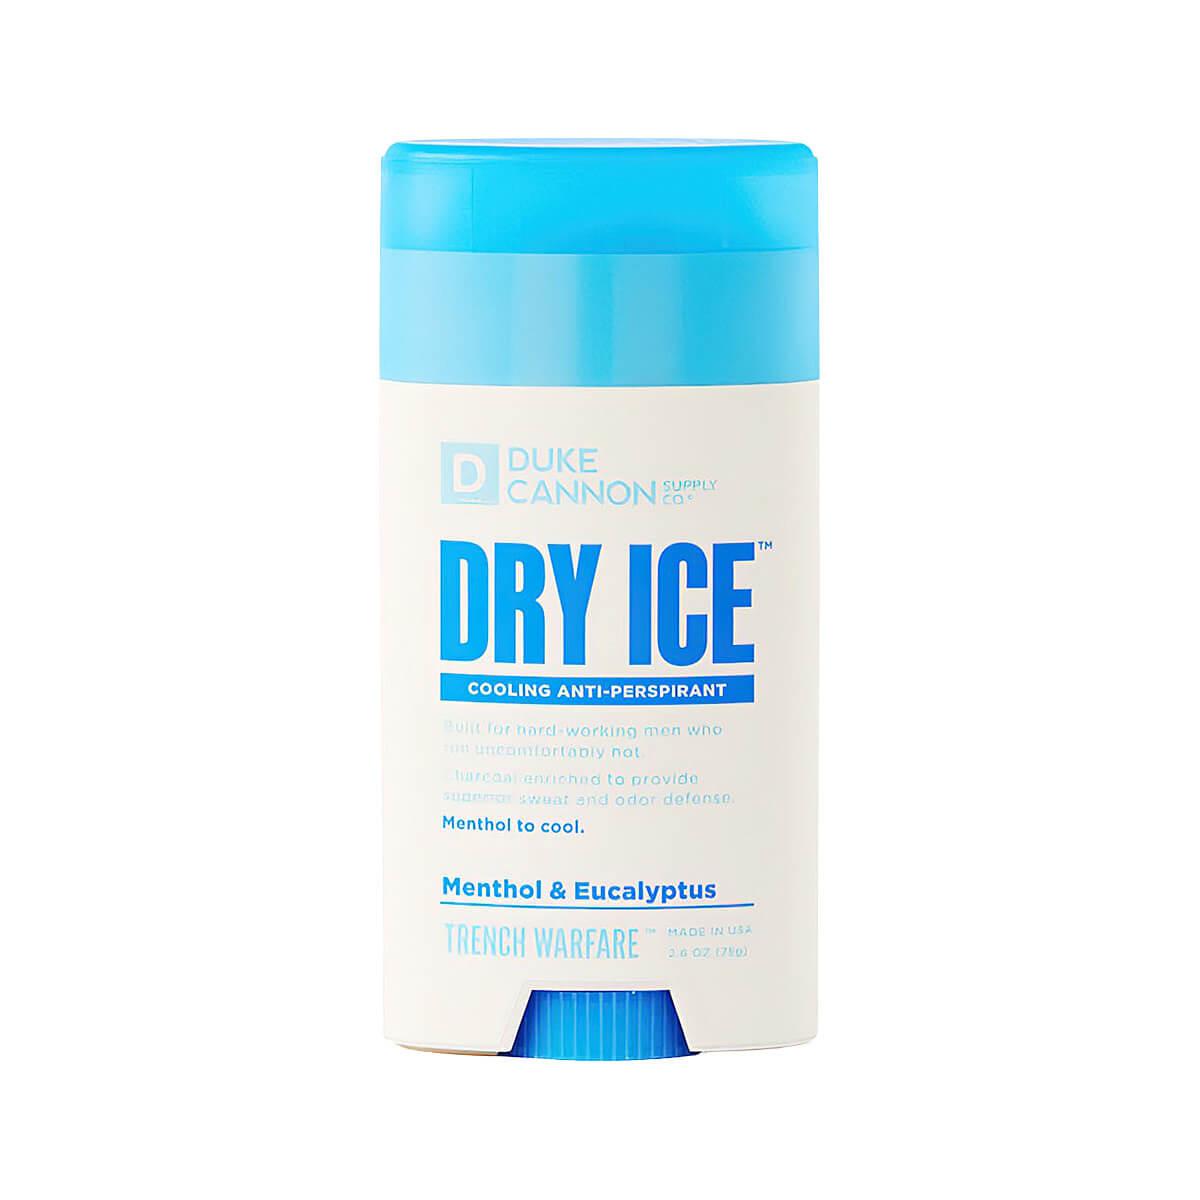  Dry Ice Cooling Antiperspirant And Deodorant - Menthol And Eucalyptus